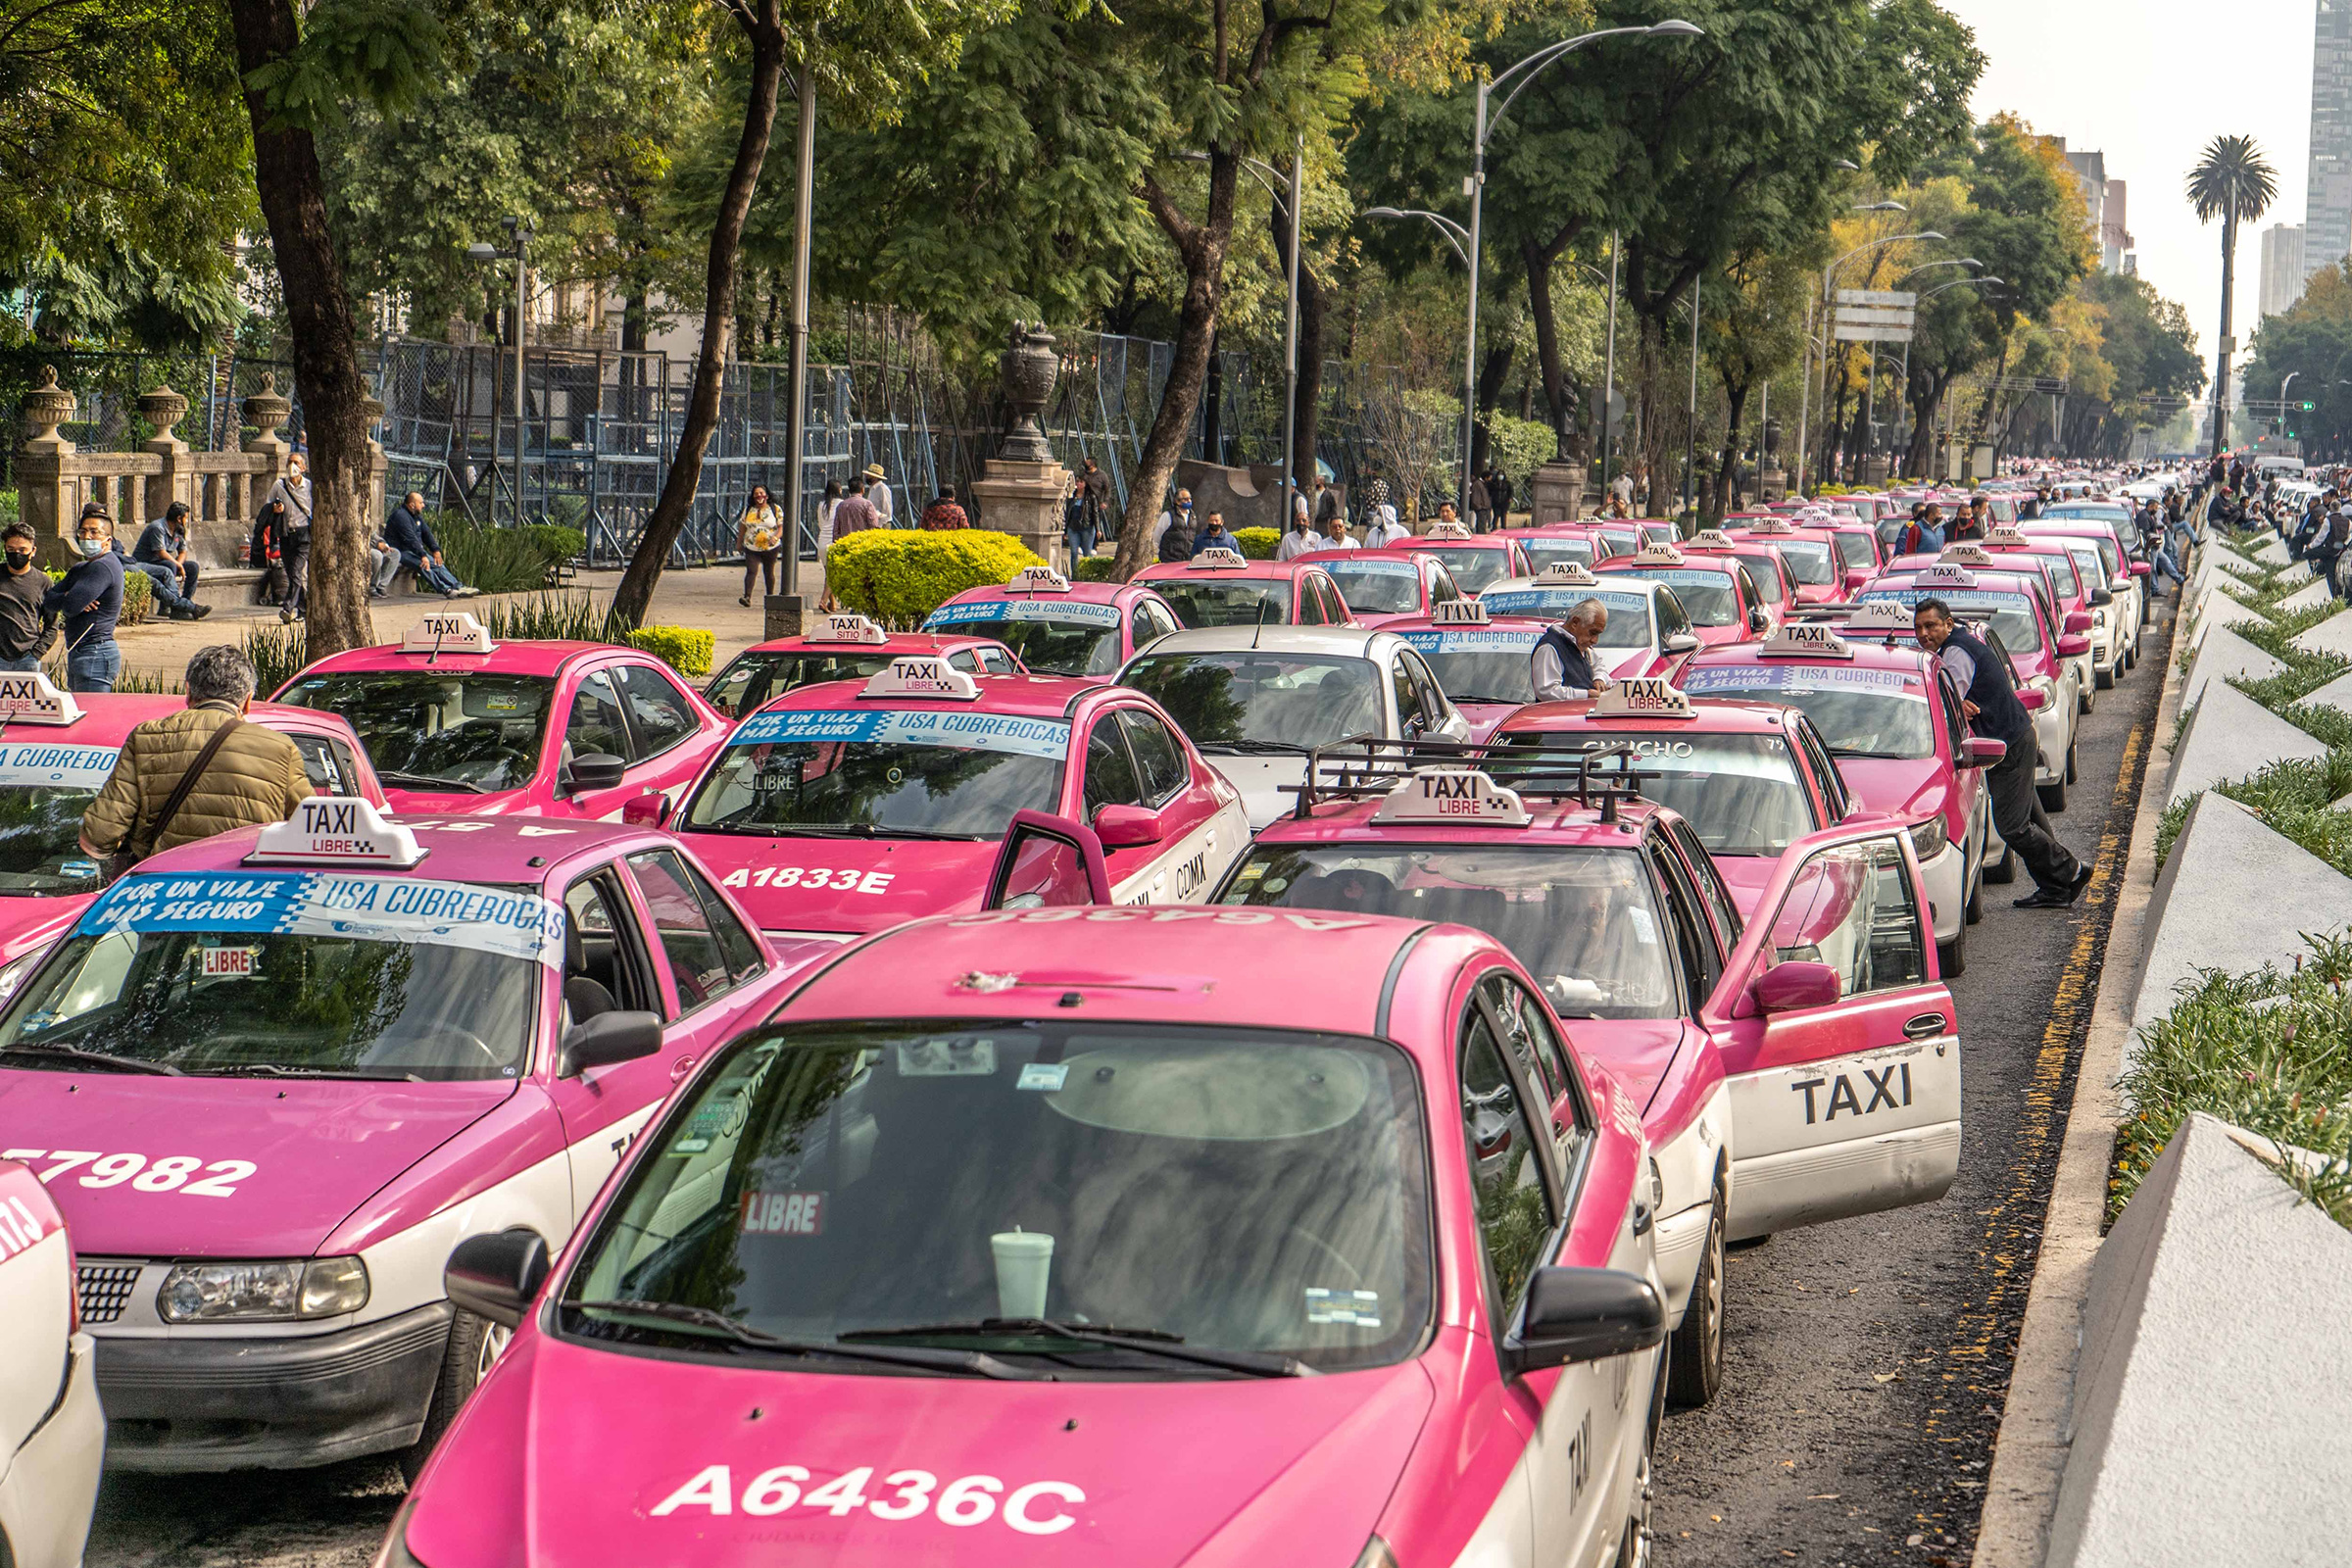 Taxi drivers in Mexico City protest on Oct. 12 over the rise of foreign ride-share apps including Uber and DiDi